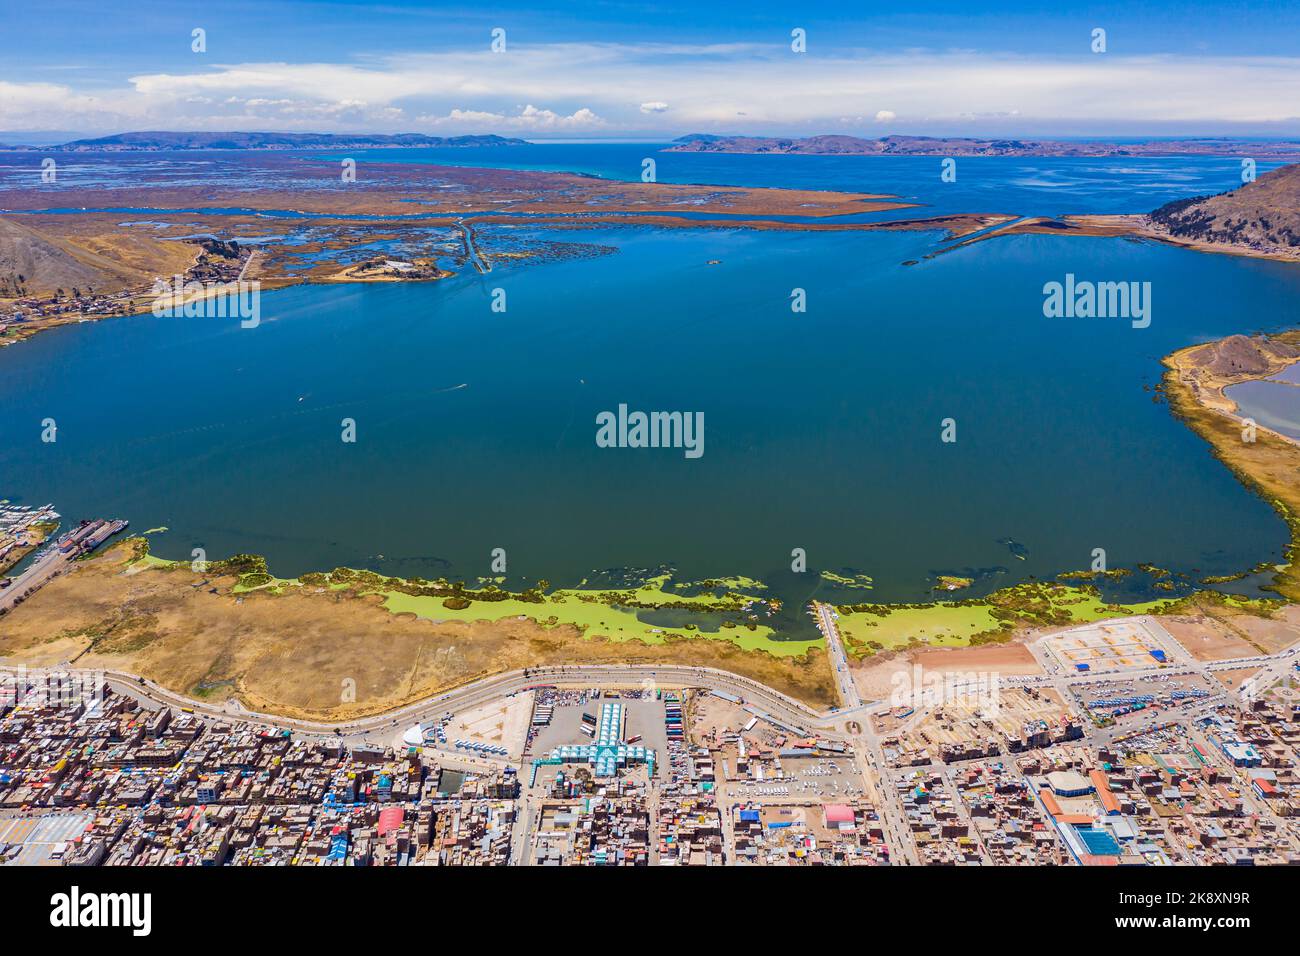 Aerial view of Lake Titicaca in Peru with the city of Puno and its port in the foreground. Stock Photo